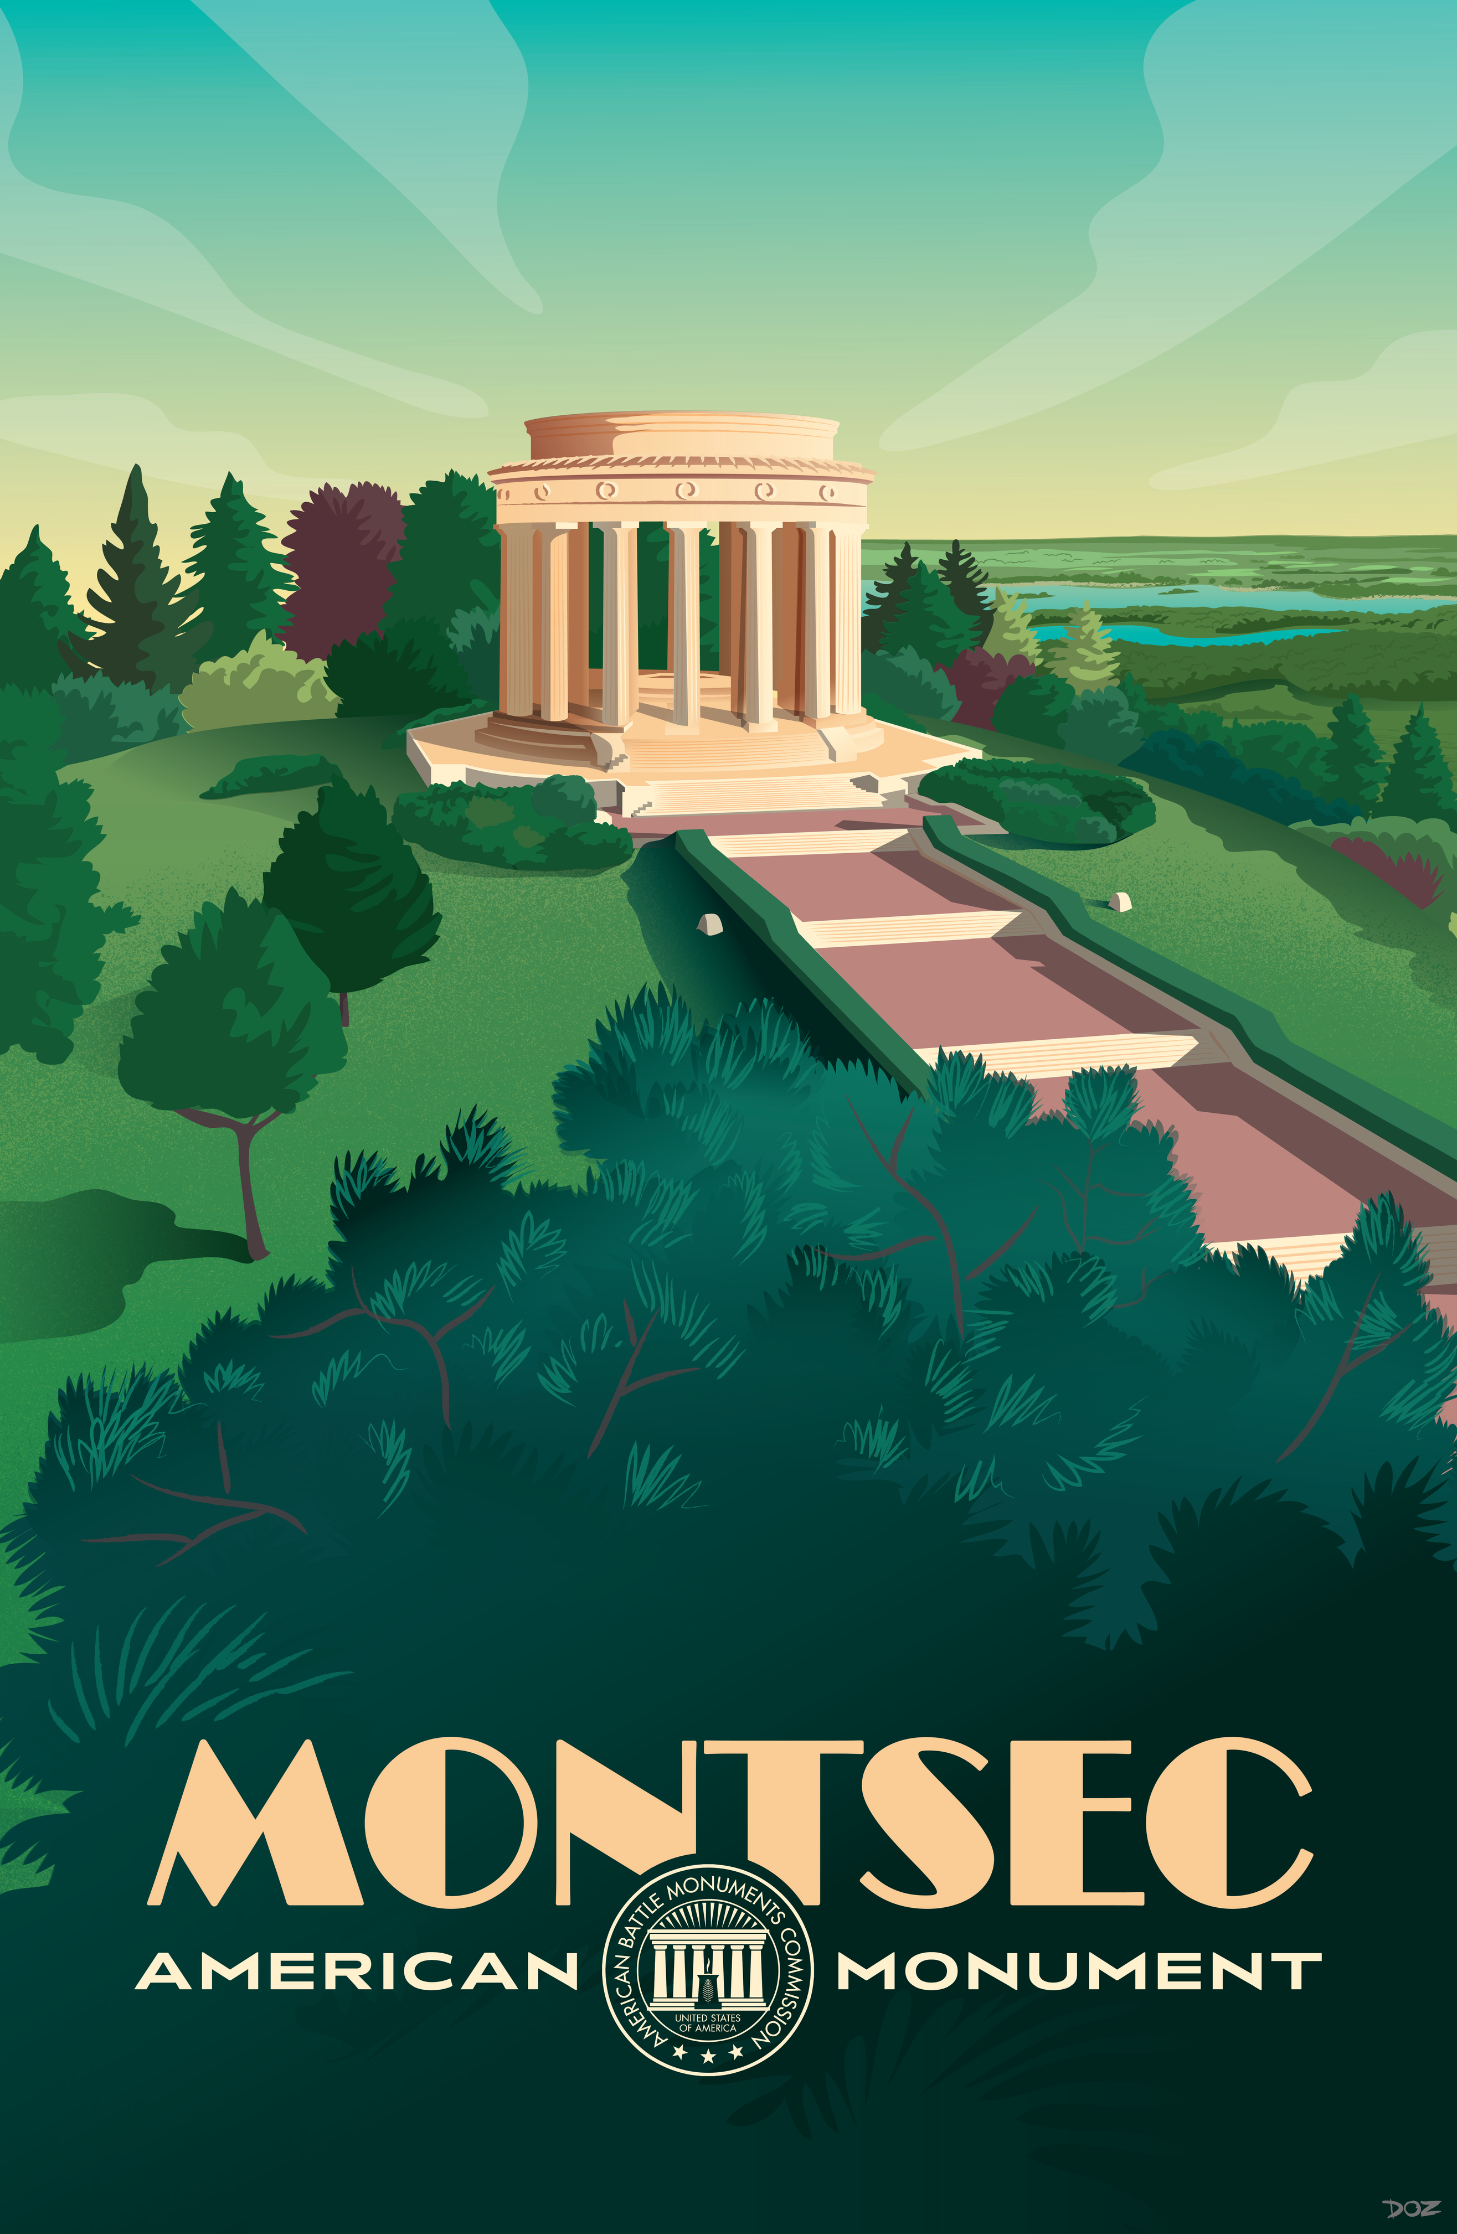 Vintage poster of Montsec American Monument created to mark ABMC Centennial